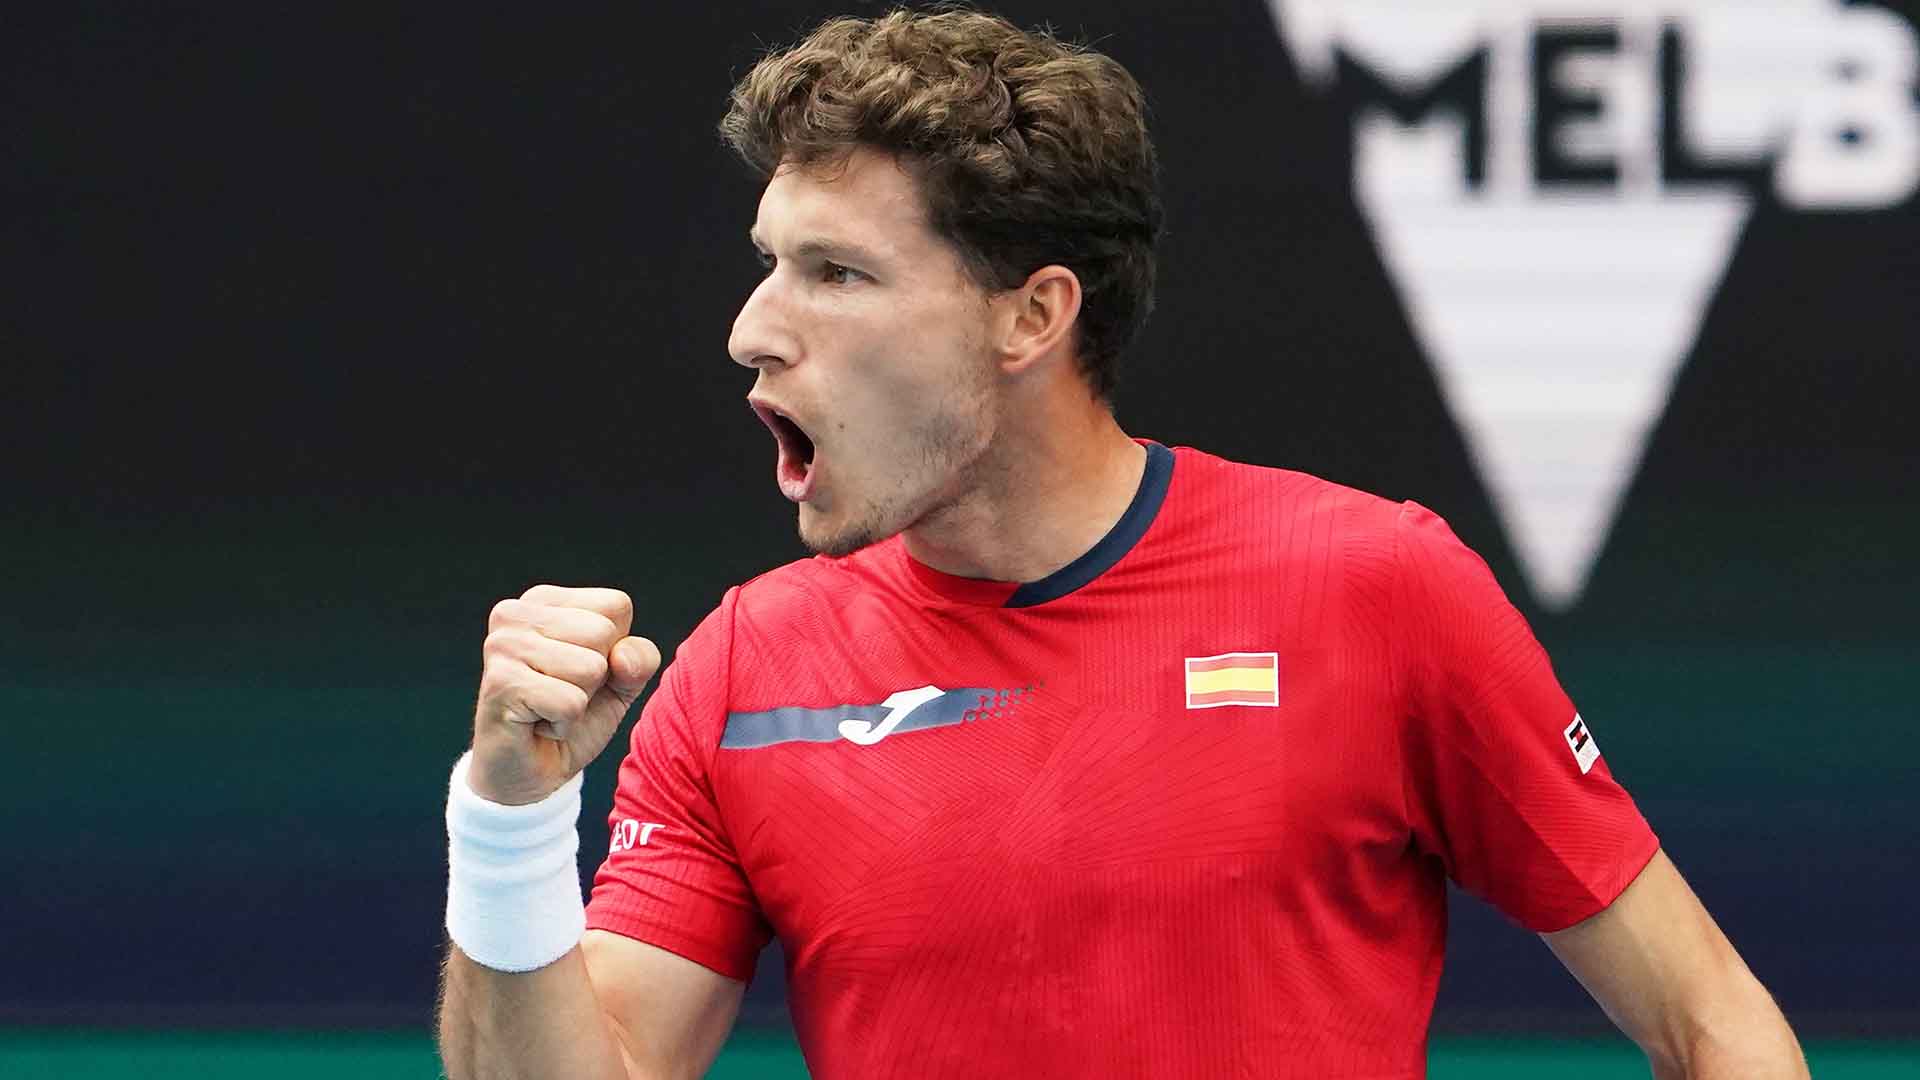 <a href='https://www.atptour.com/en/players/pablo-carreno-busta/cd85/overview'>Pablo Carreno Busta</a> converts four of seven break points to defeat <a href='https://www.atptour.com/en/players/john-millman/mh30/overview'>John Millman</a> in straights sets at the <a href='https://www.atptour.com/en/tournaments/atp-cup/8888/overview'>ATP Cup</a> on Tuesday.